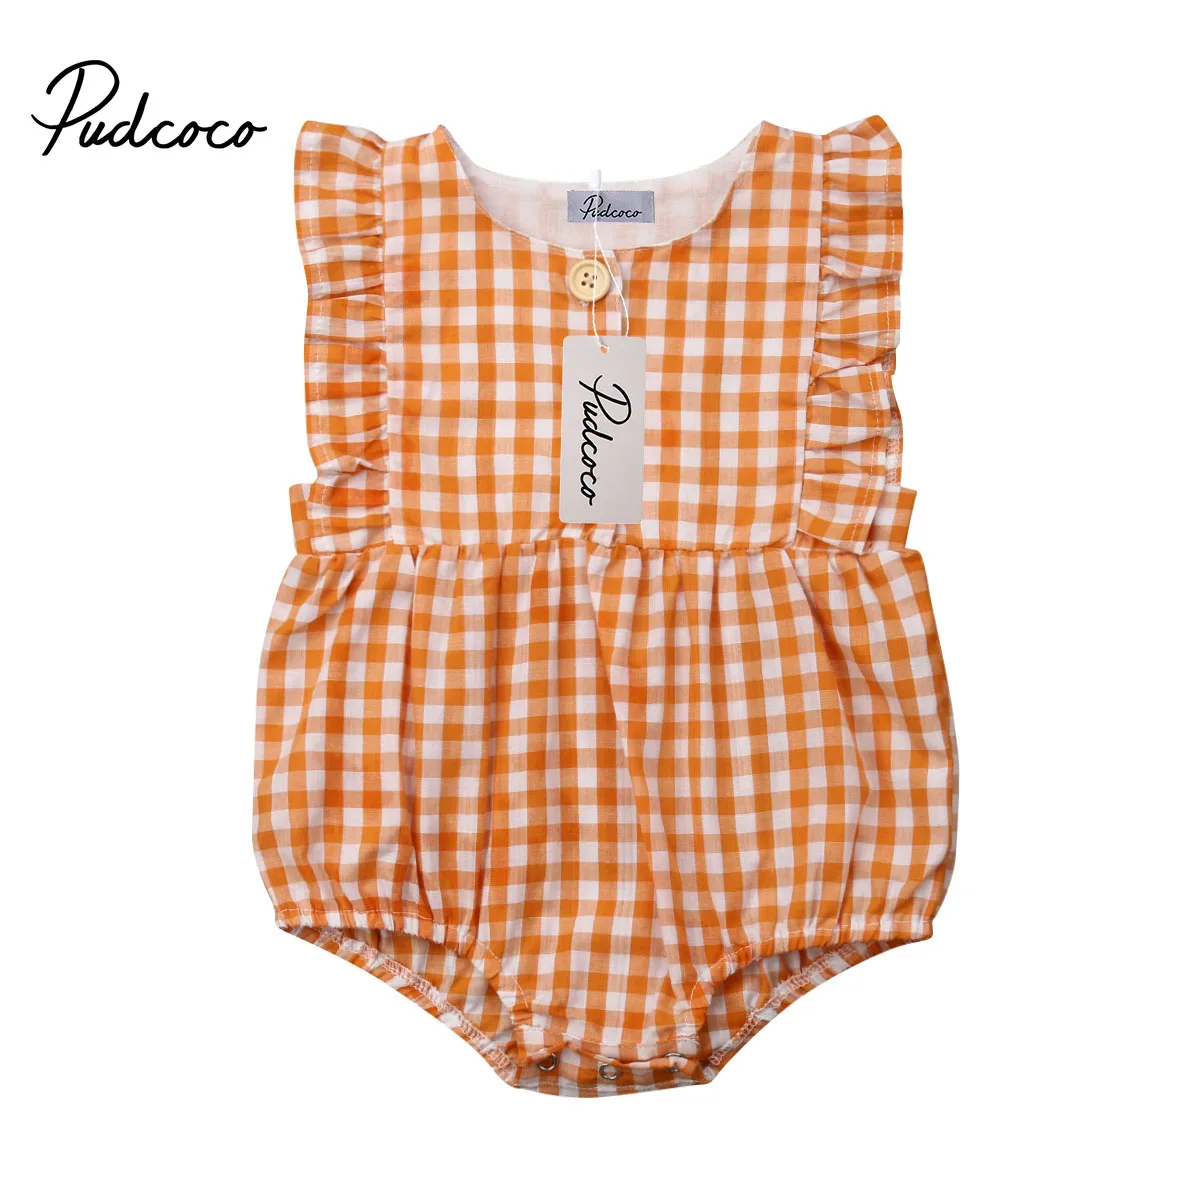 

Pudcoco Newborn Infant Baby Girl Ruffle Plaid Romper Sleeveless Jumpsuit One Piece Outfits Sunsuit Toddler Girl Summer Clothes